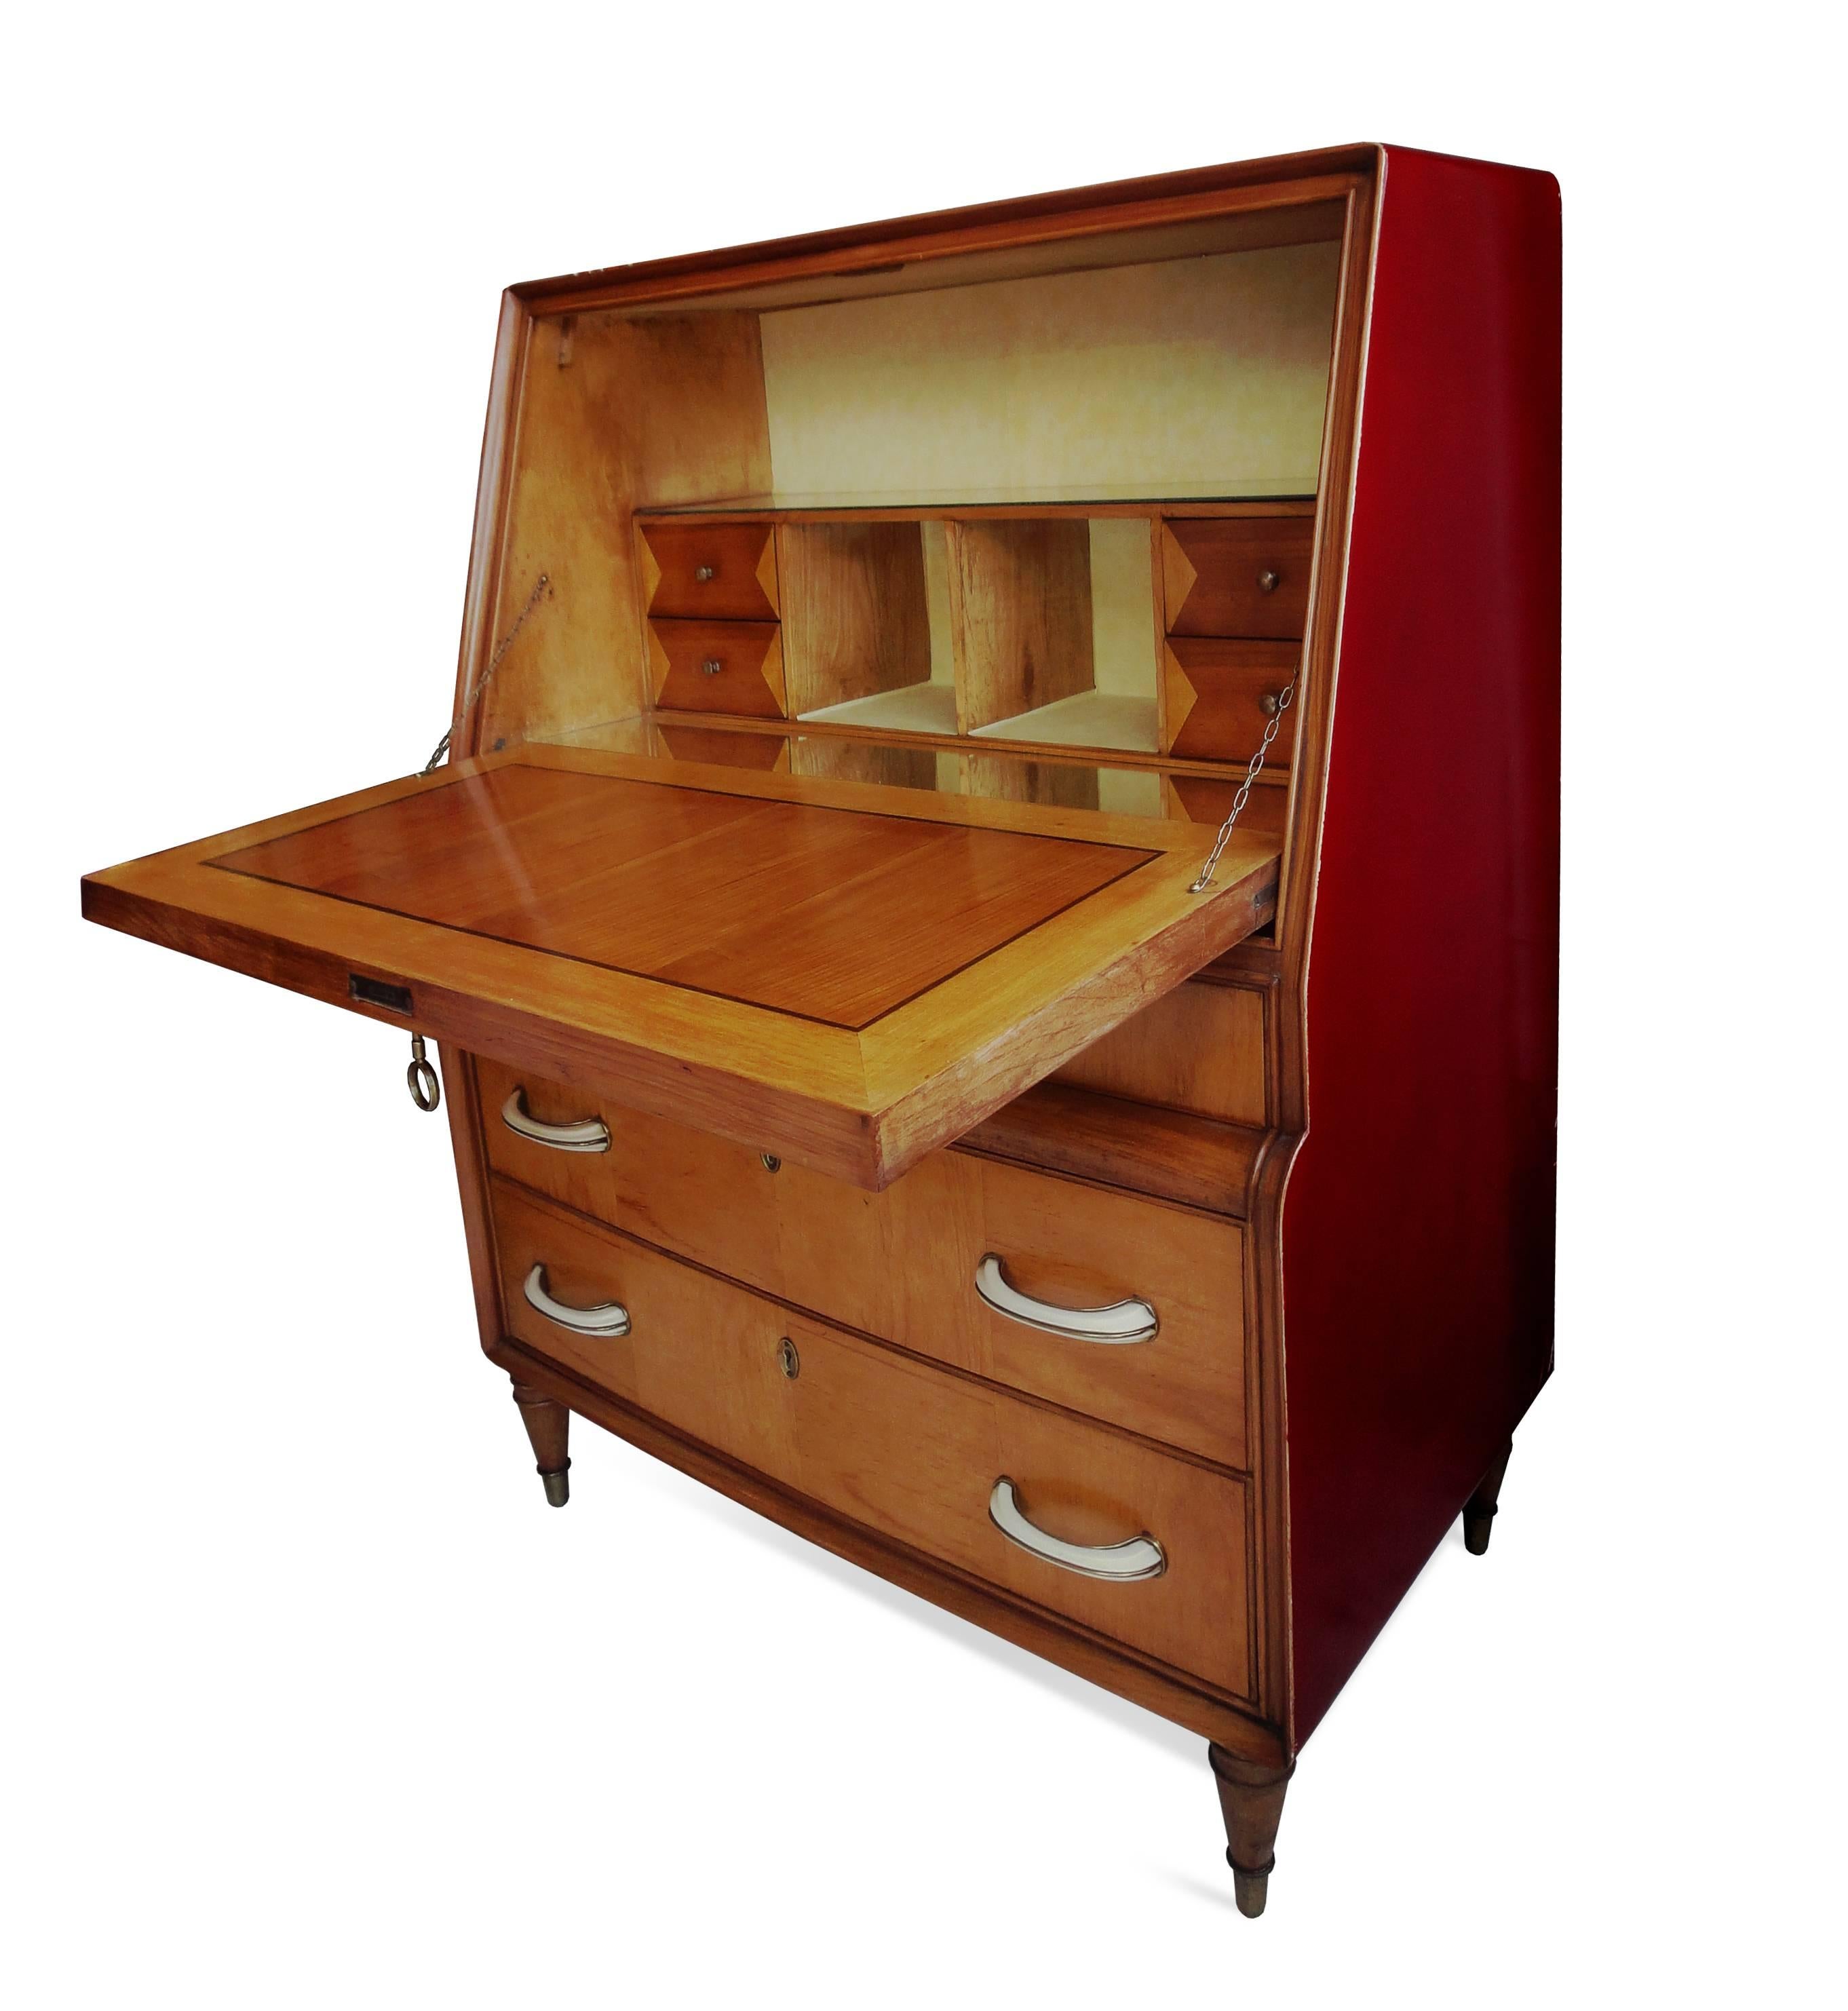 A red-lacquered “cabinet en abattant” with a satin-wood front, a glass interior and horn drawer-knobs.